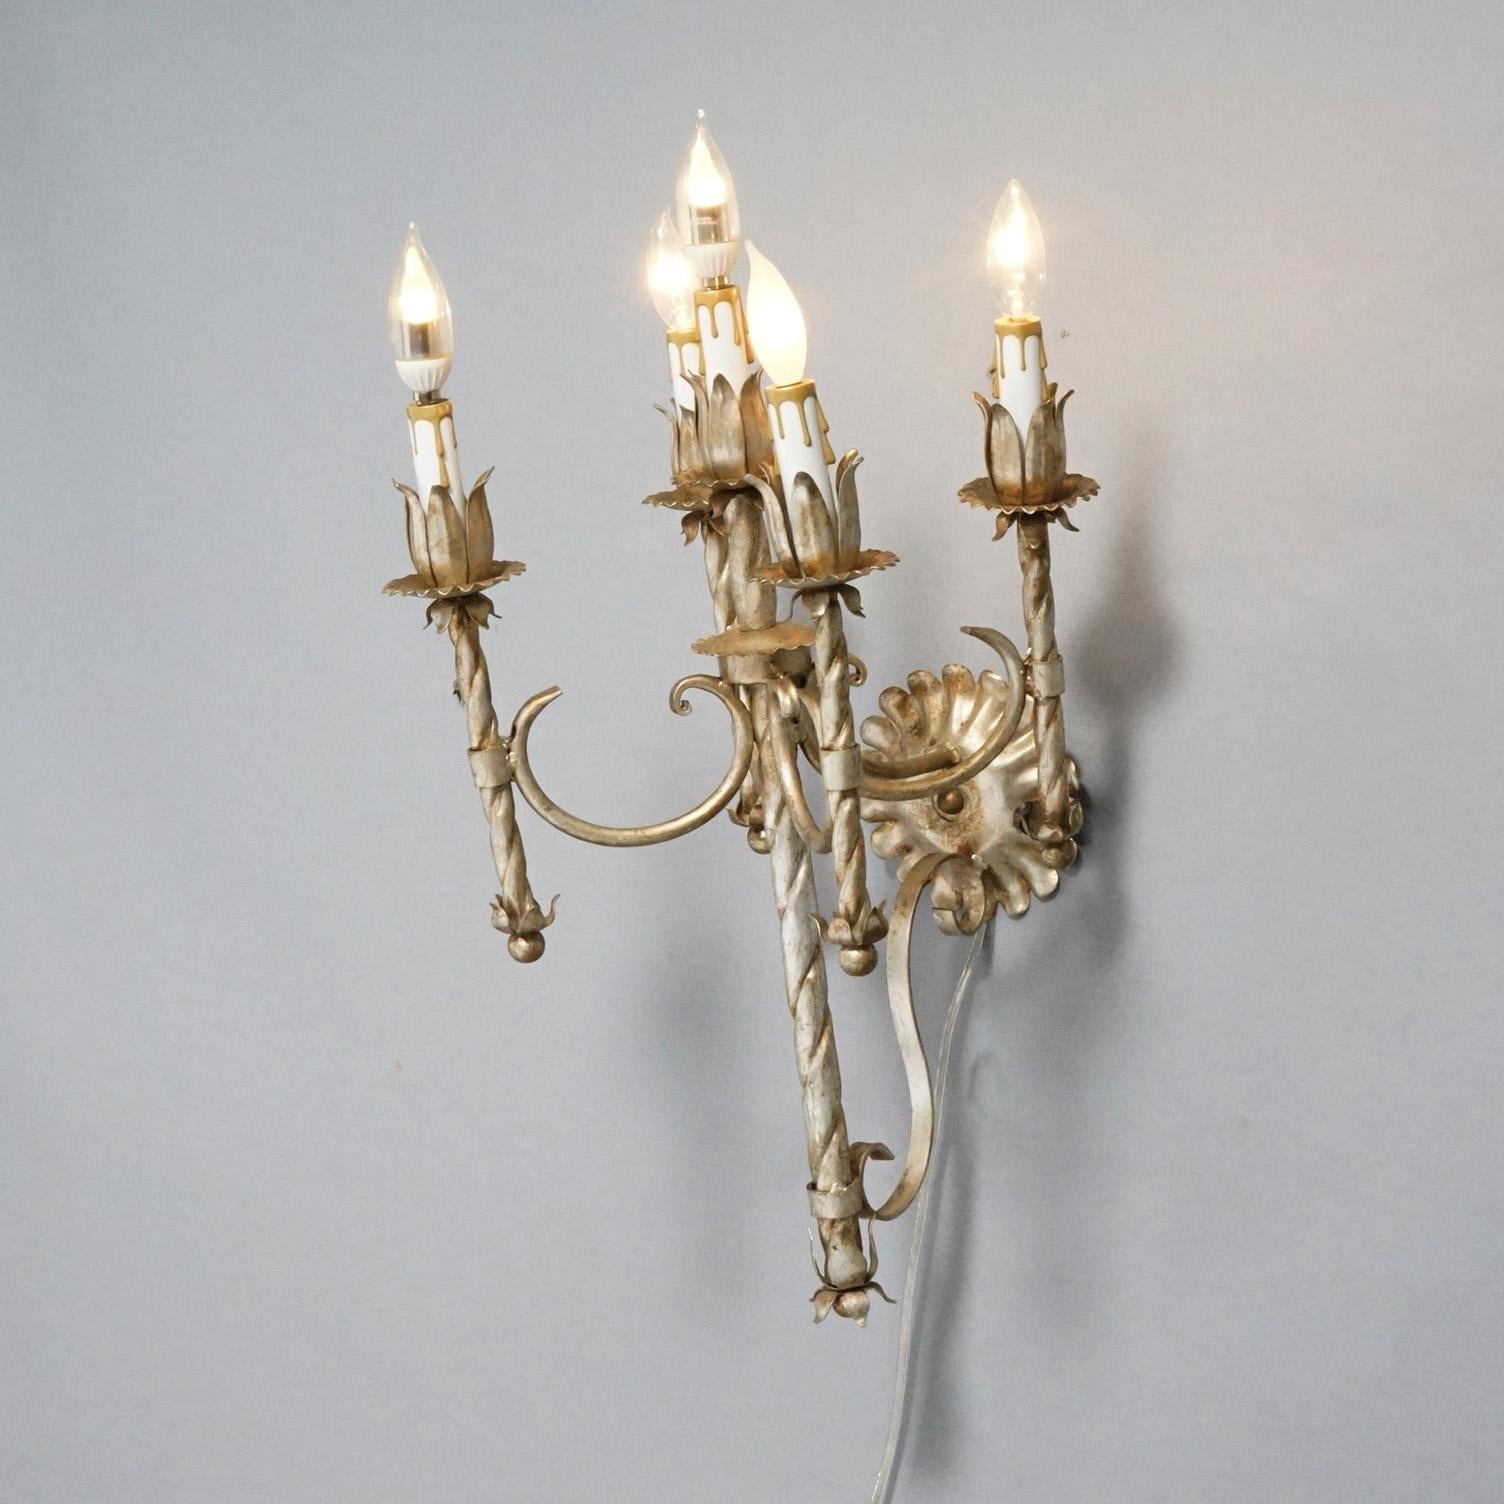 Antique Arts & Crafts Gothic Silvered Finish Candelabra Wall Sconces 20th C. For Sale 4